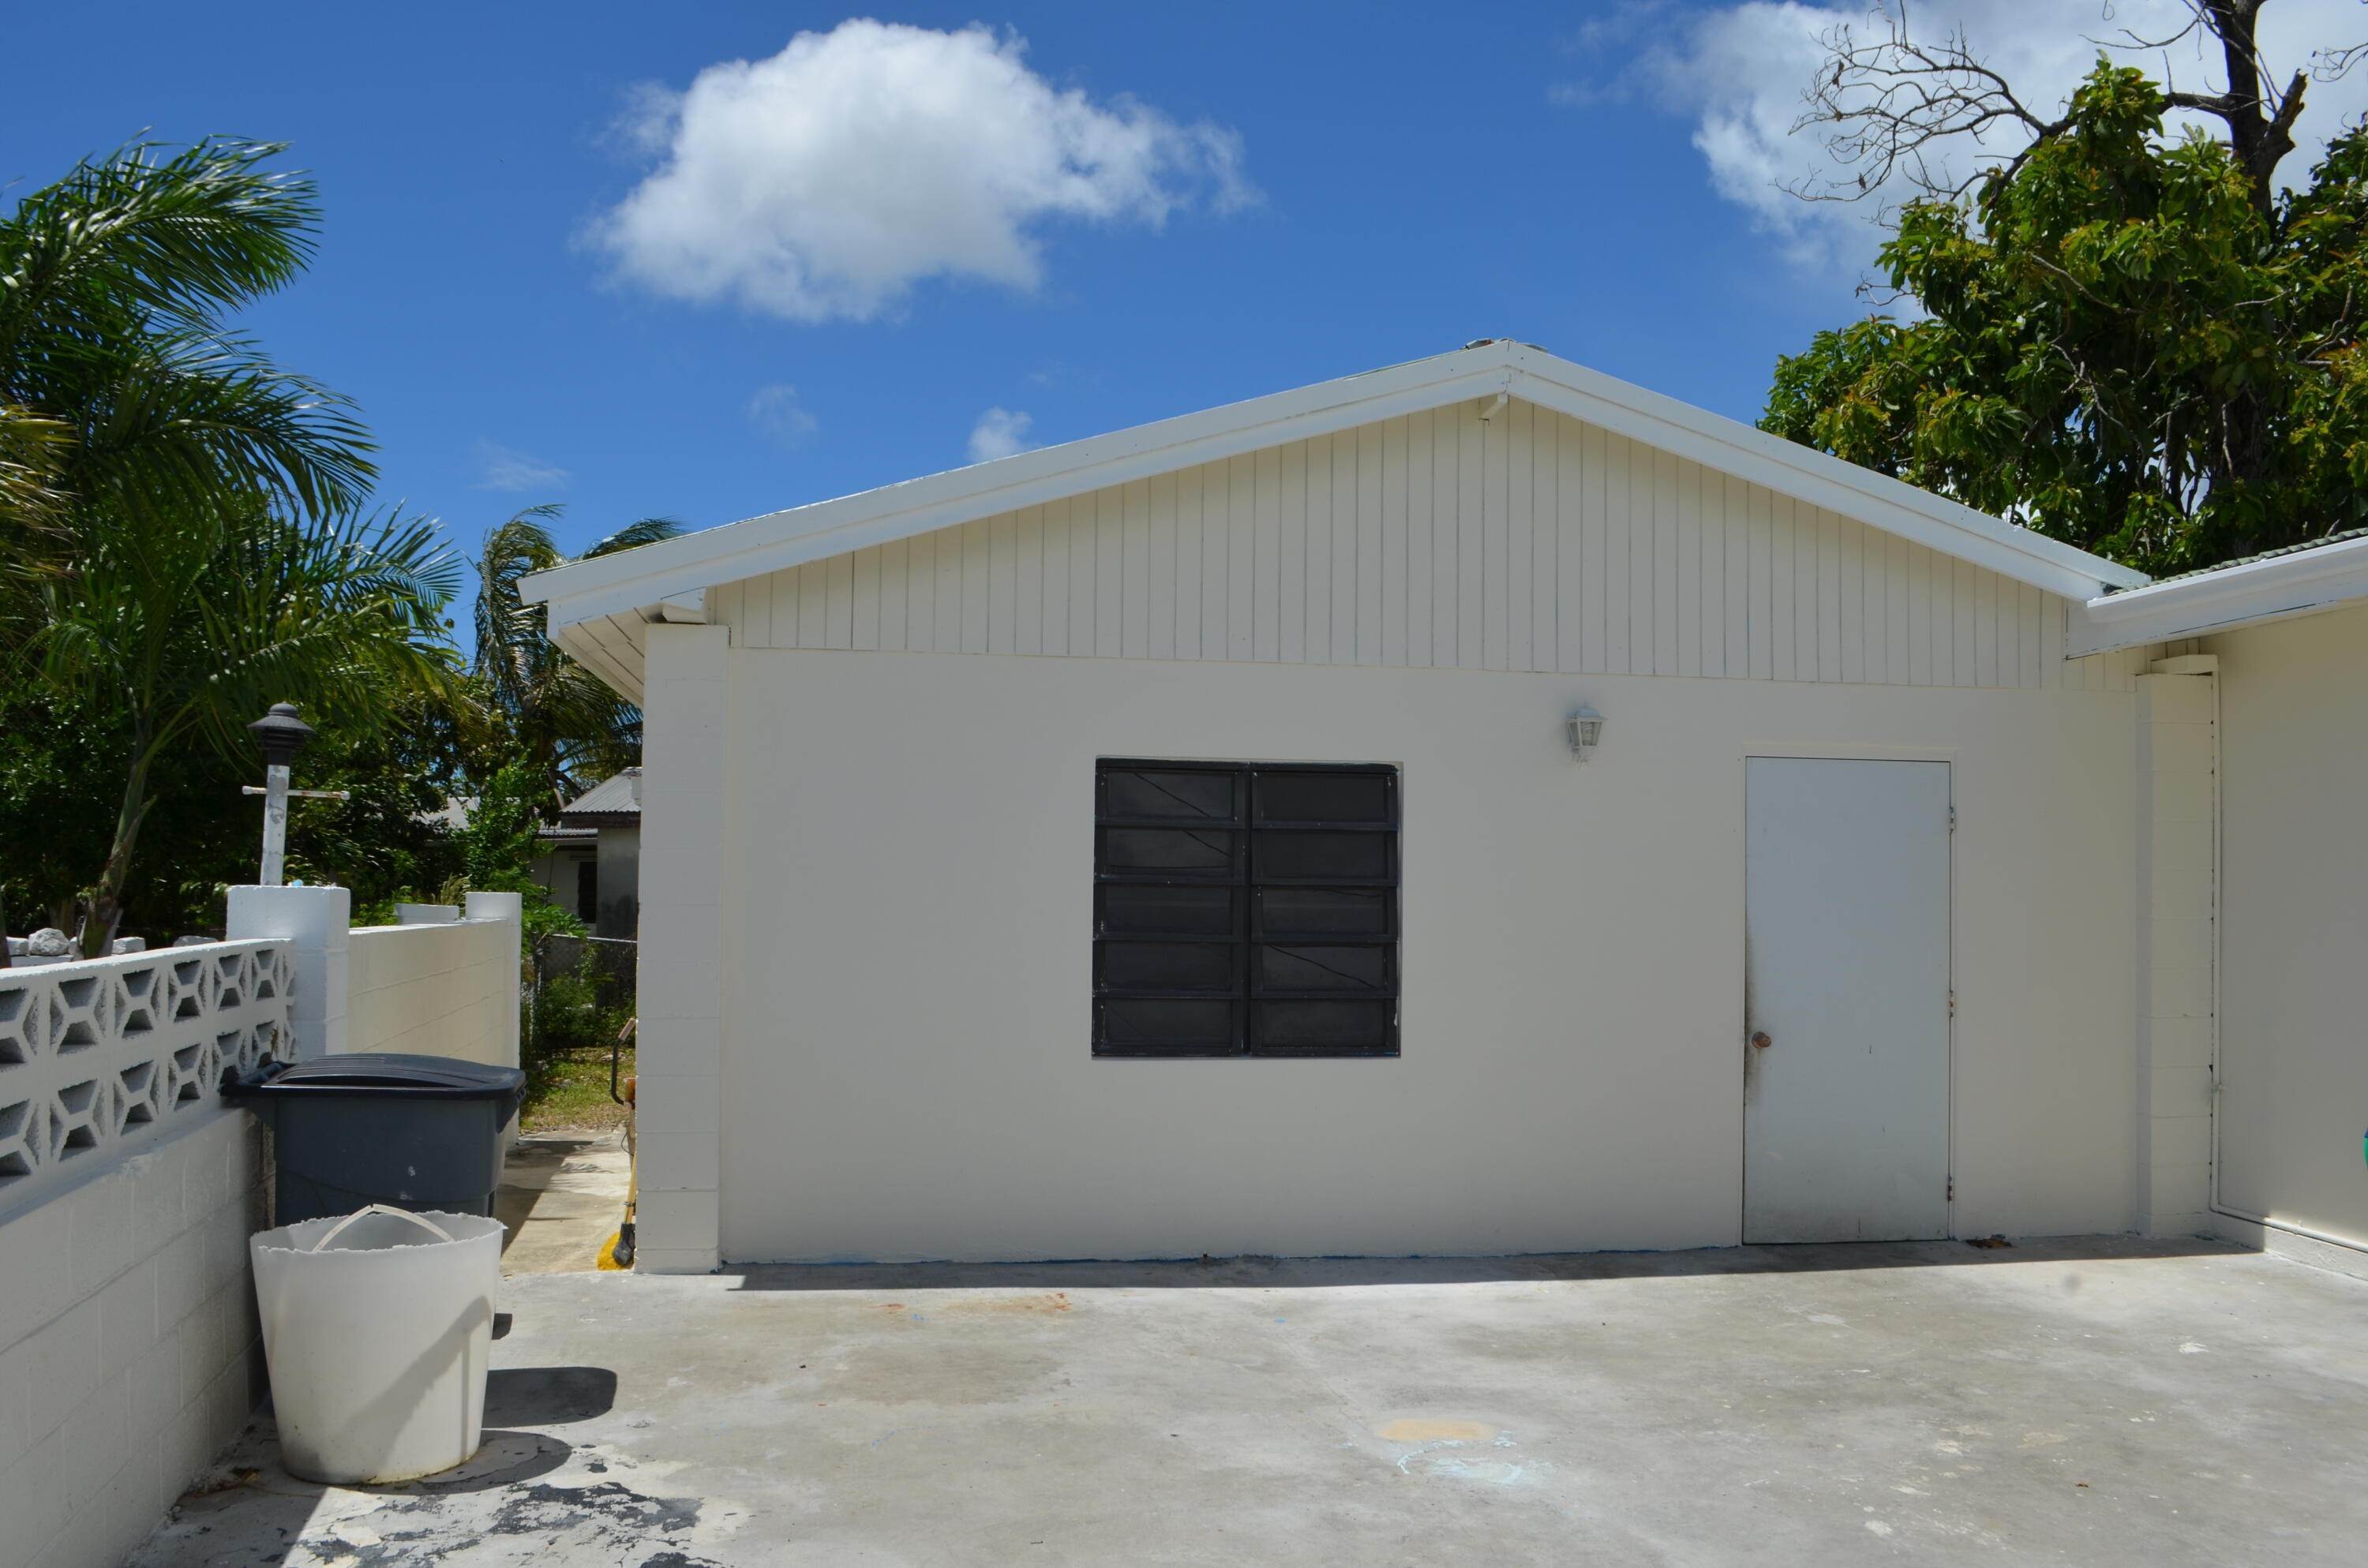 3. Single Family Homes for Sale at 97 Strawberry Hill QU St Croix, Virgin Islands 00820 United States Virgin Islands